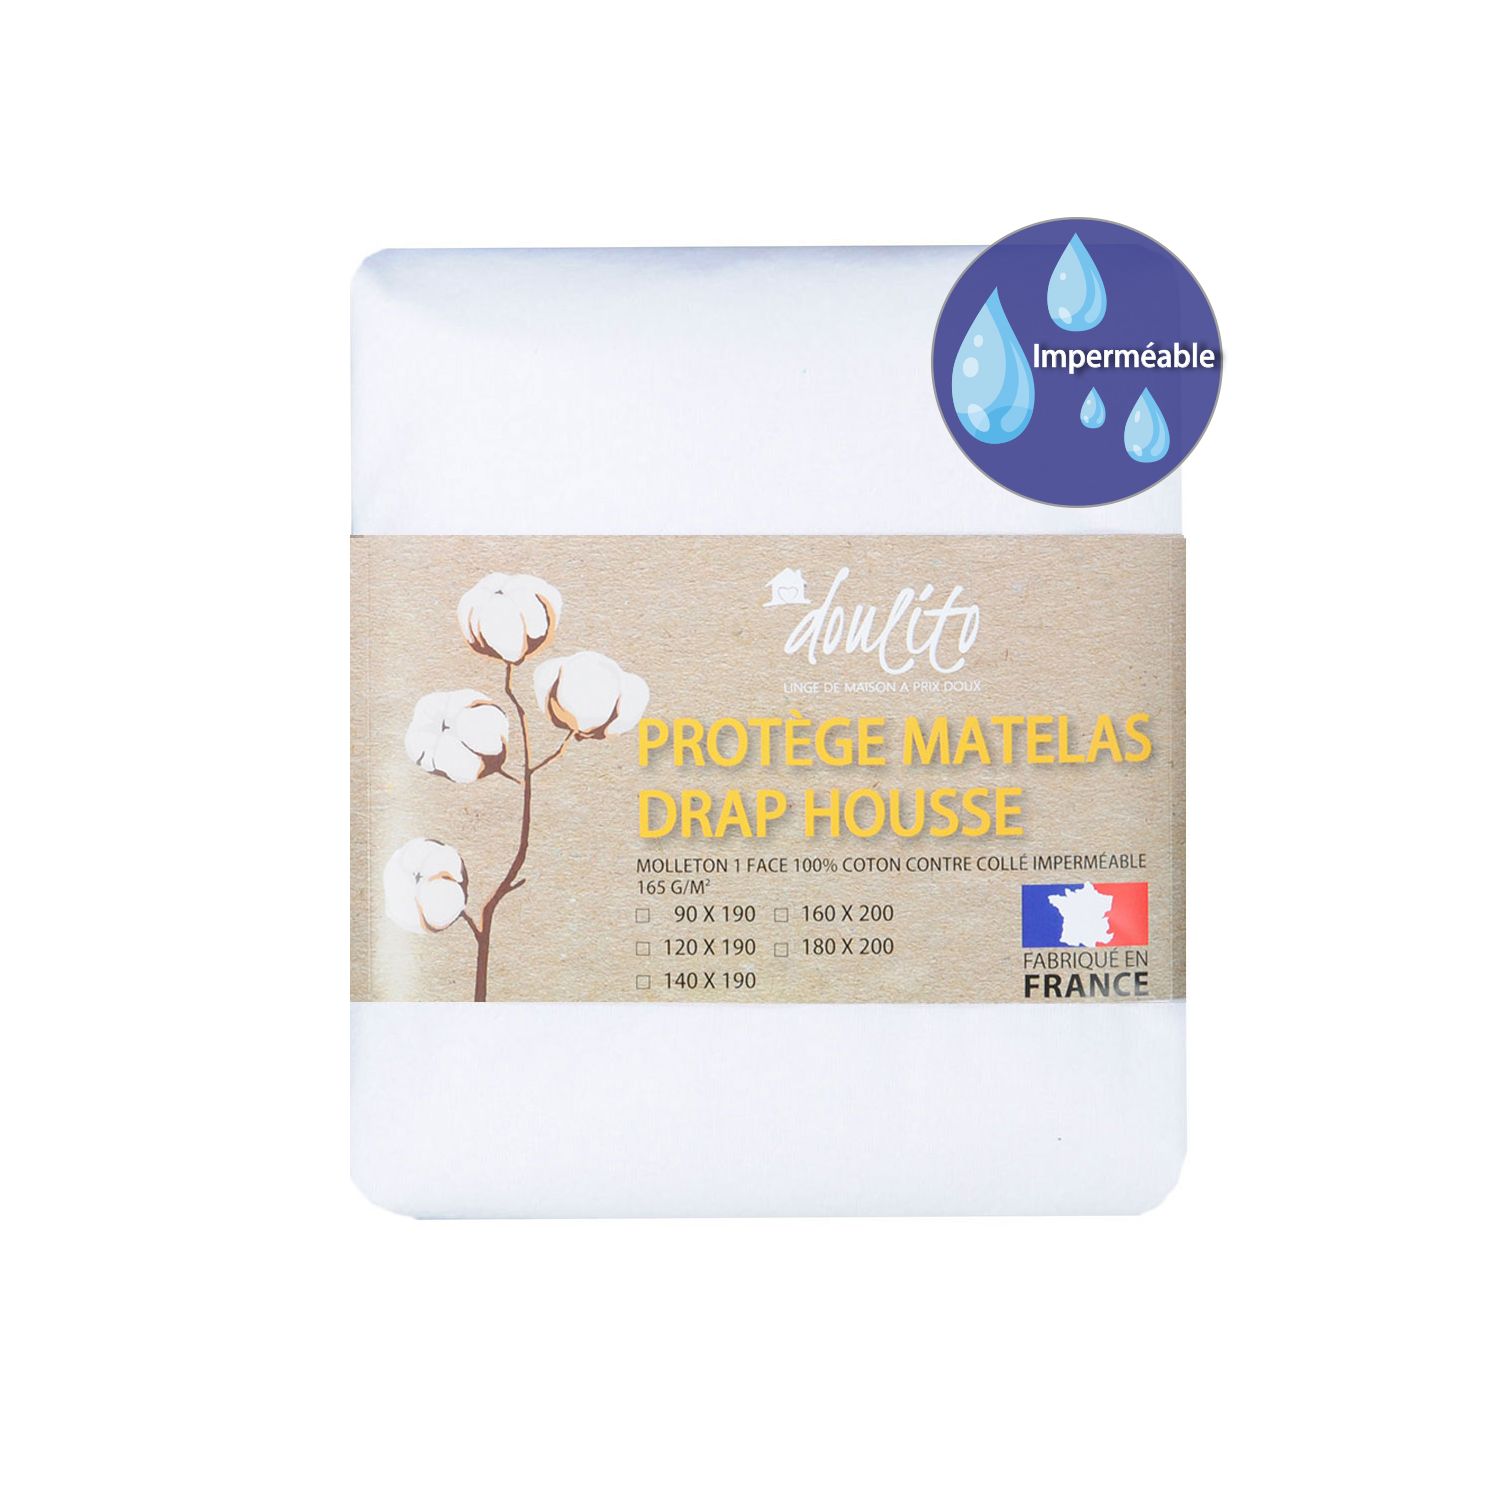 Protège matelas imperméable Doulito - 140x190 cm - Made in France - Coton